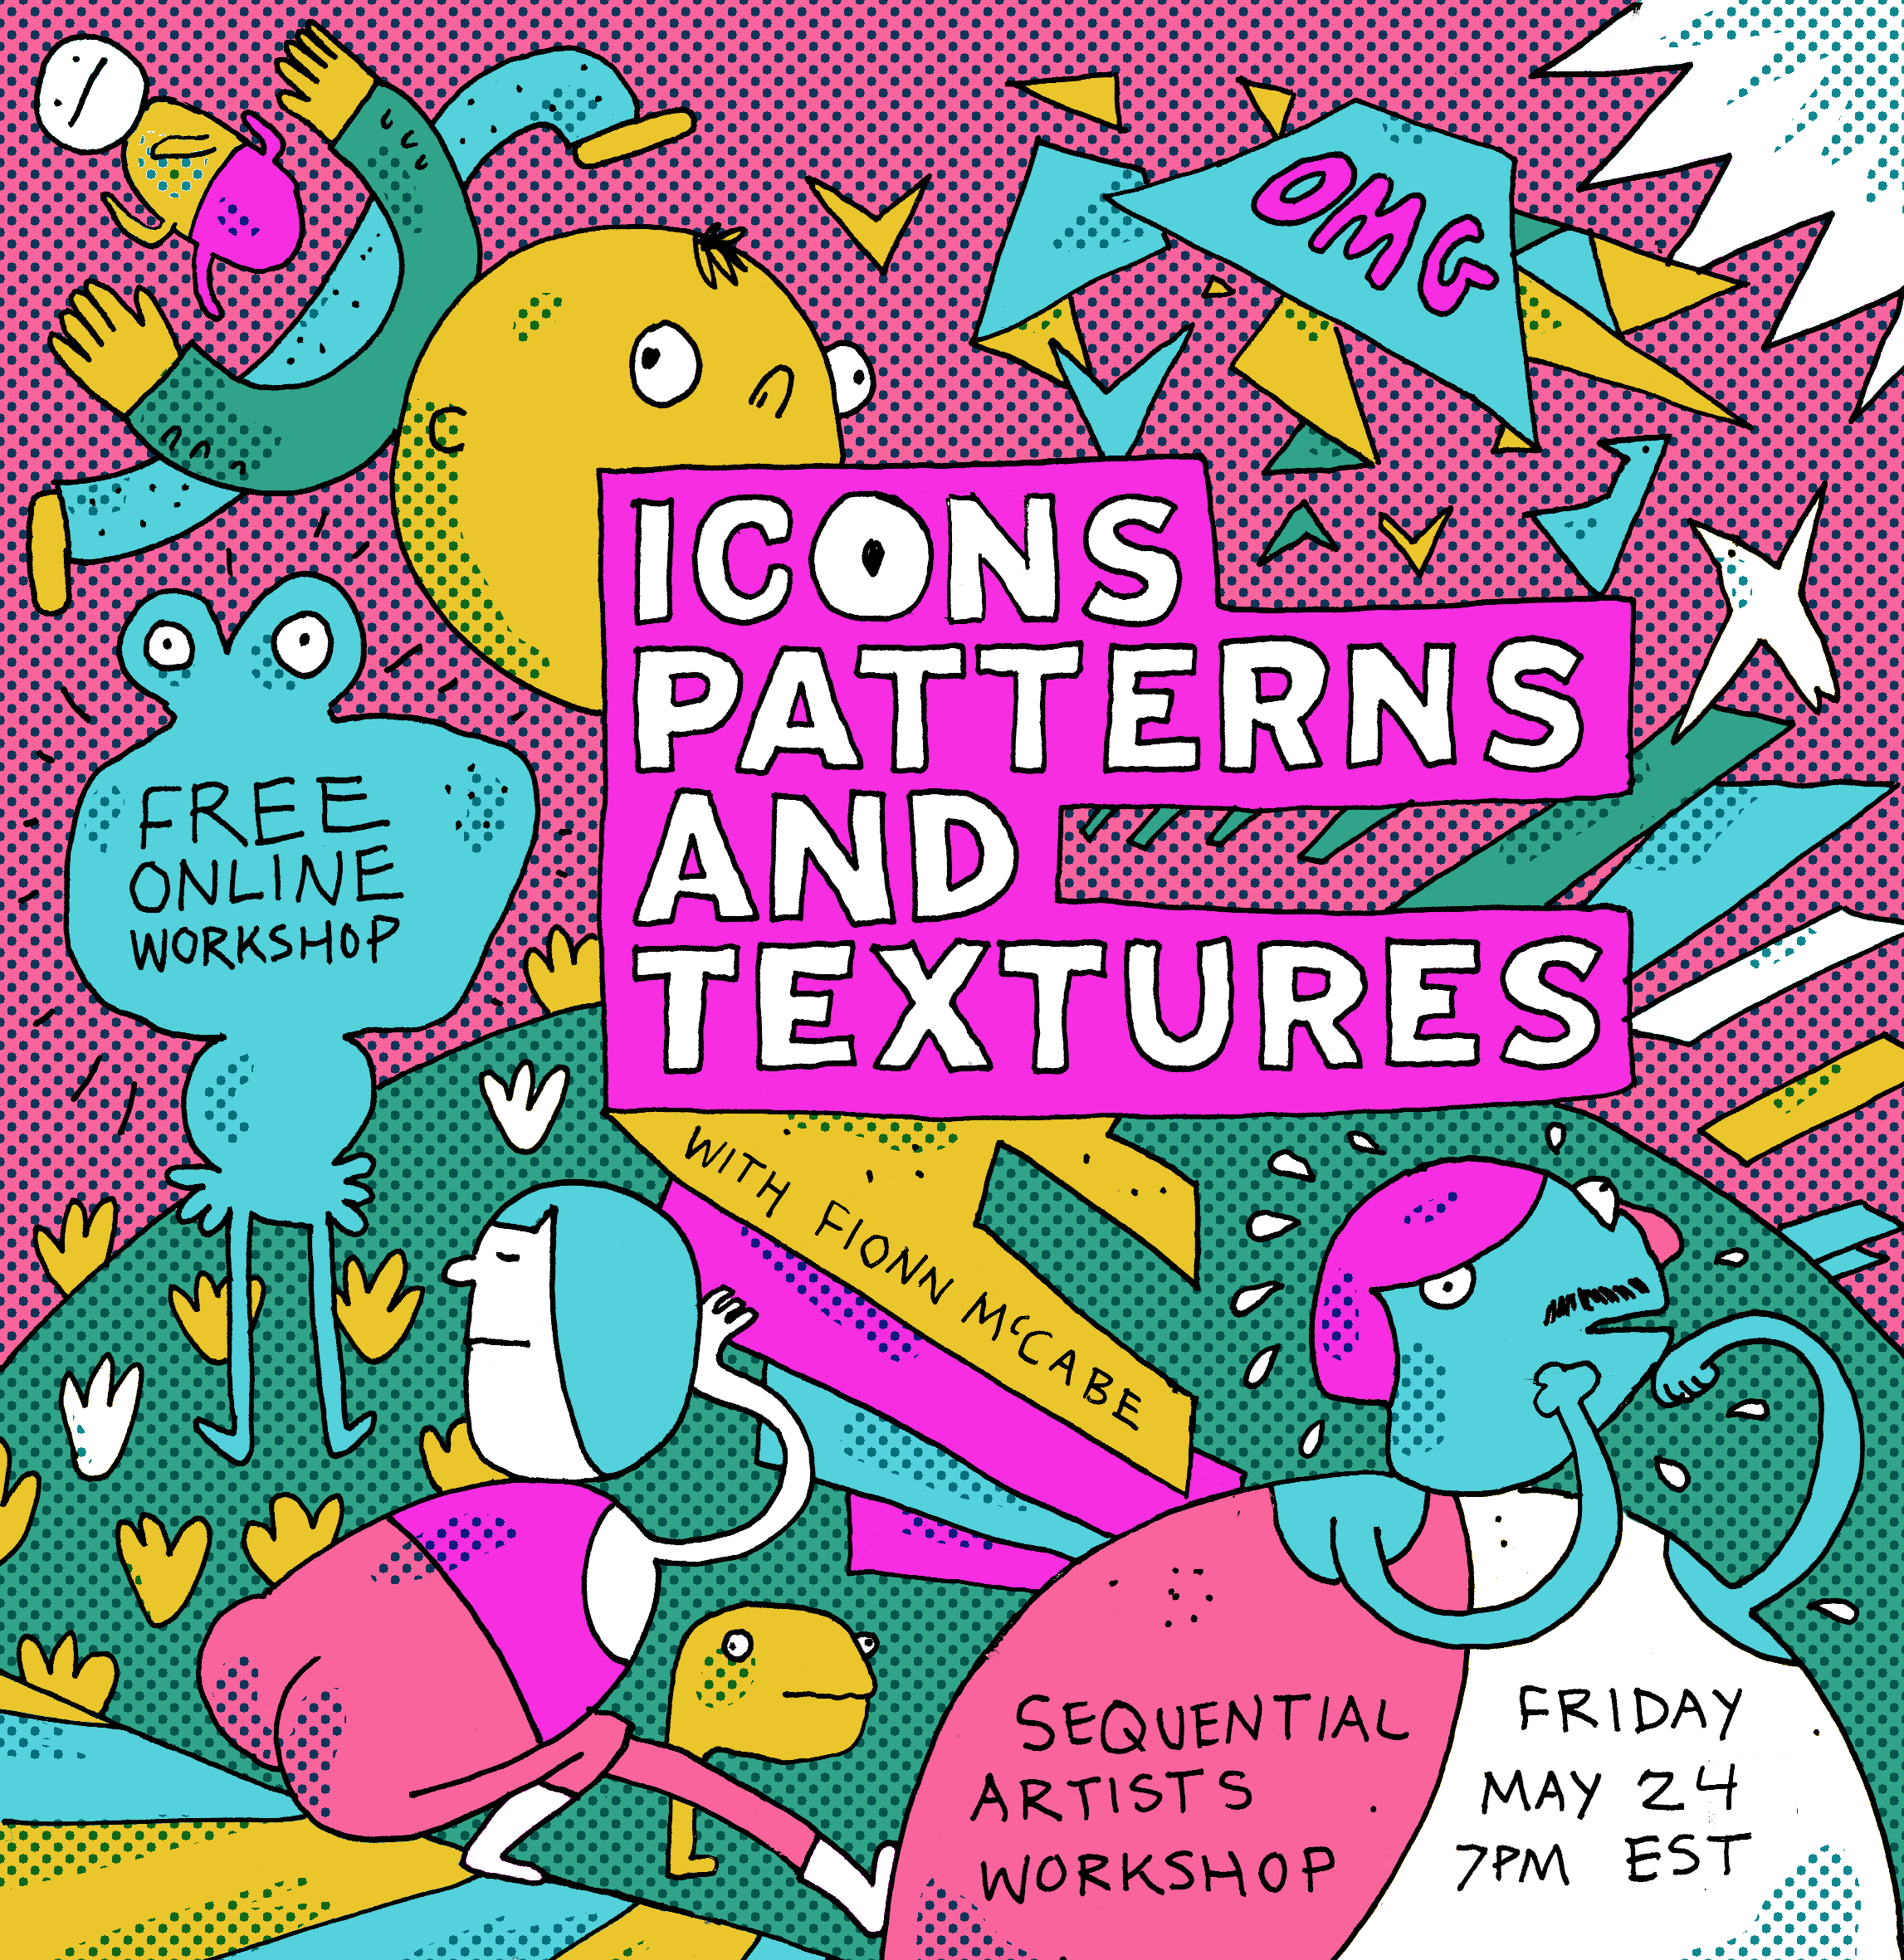 "Free online workshop: Icons Patterns and Textures with Fionn McCabe, Sequential Artists Workshop, Friday May 24 7pm EST"